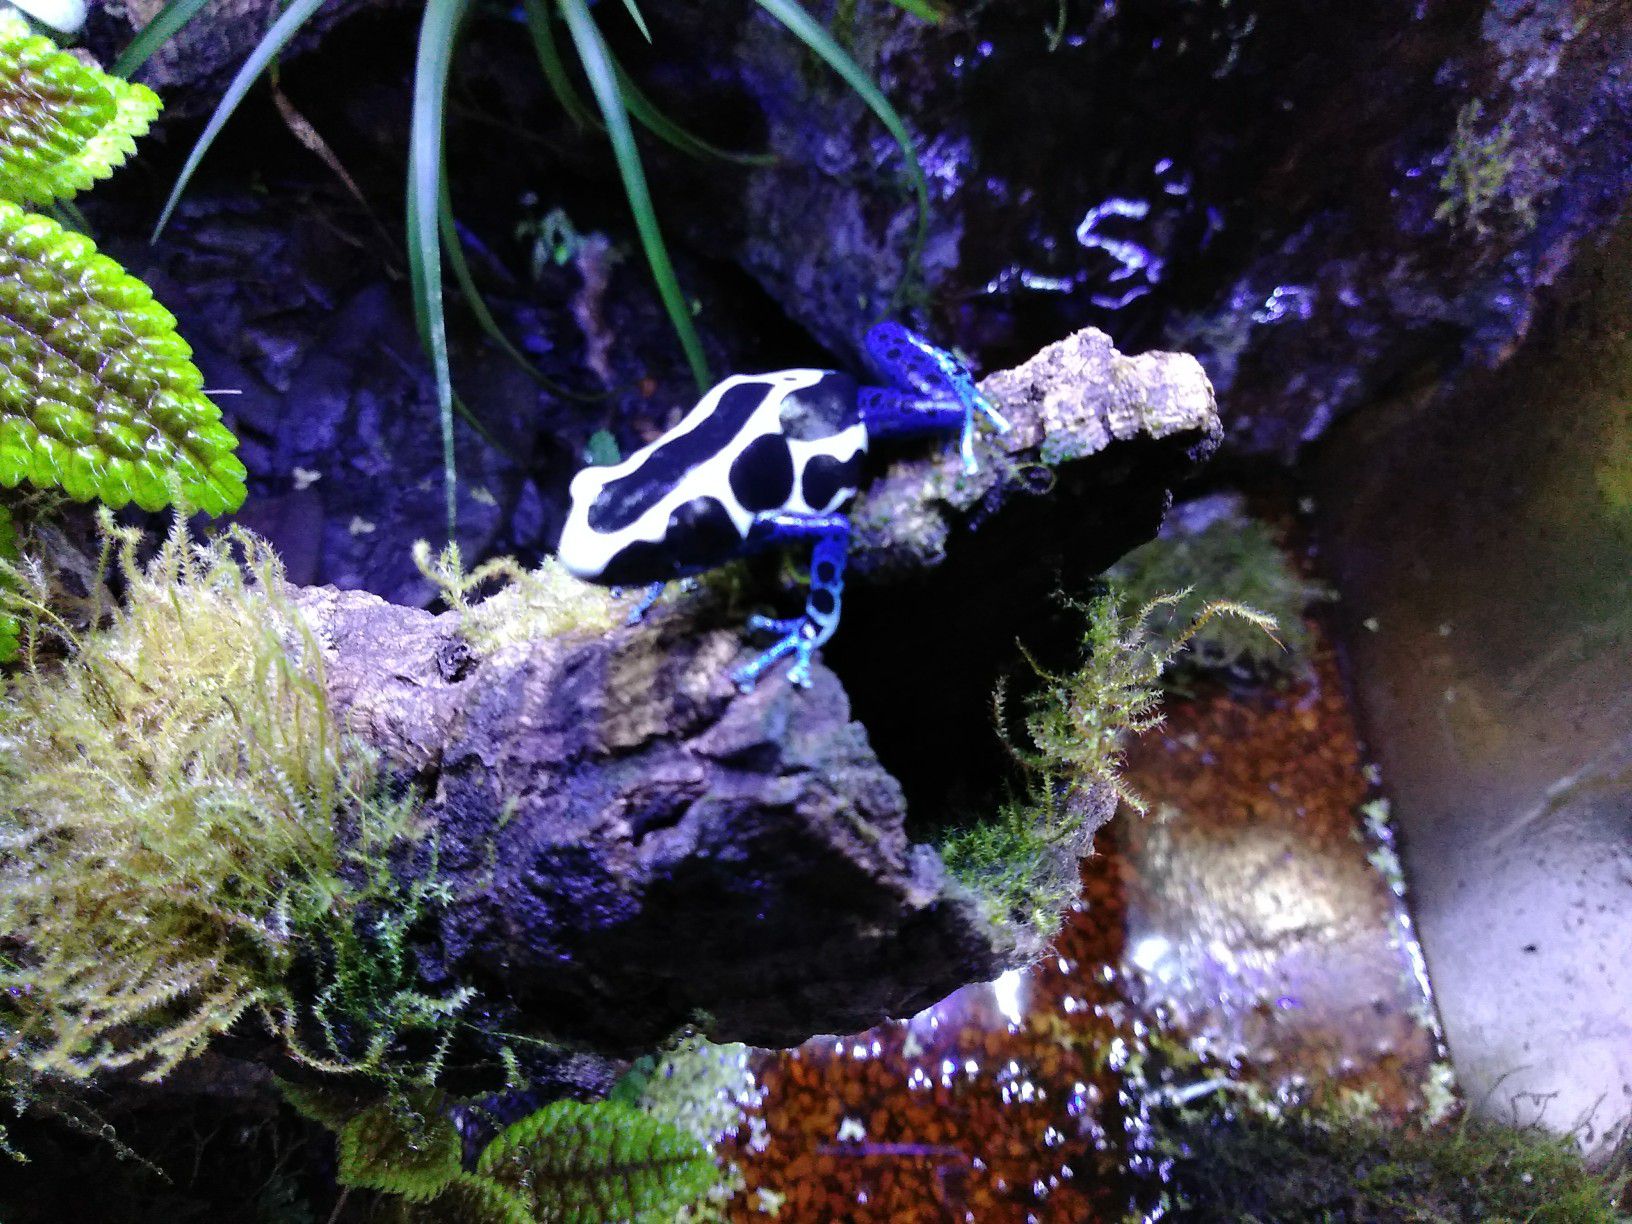 40g fully planted dart frogs